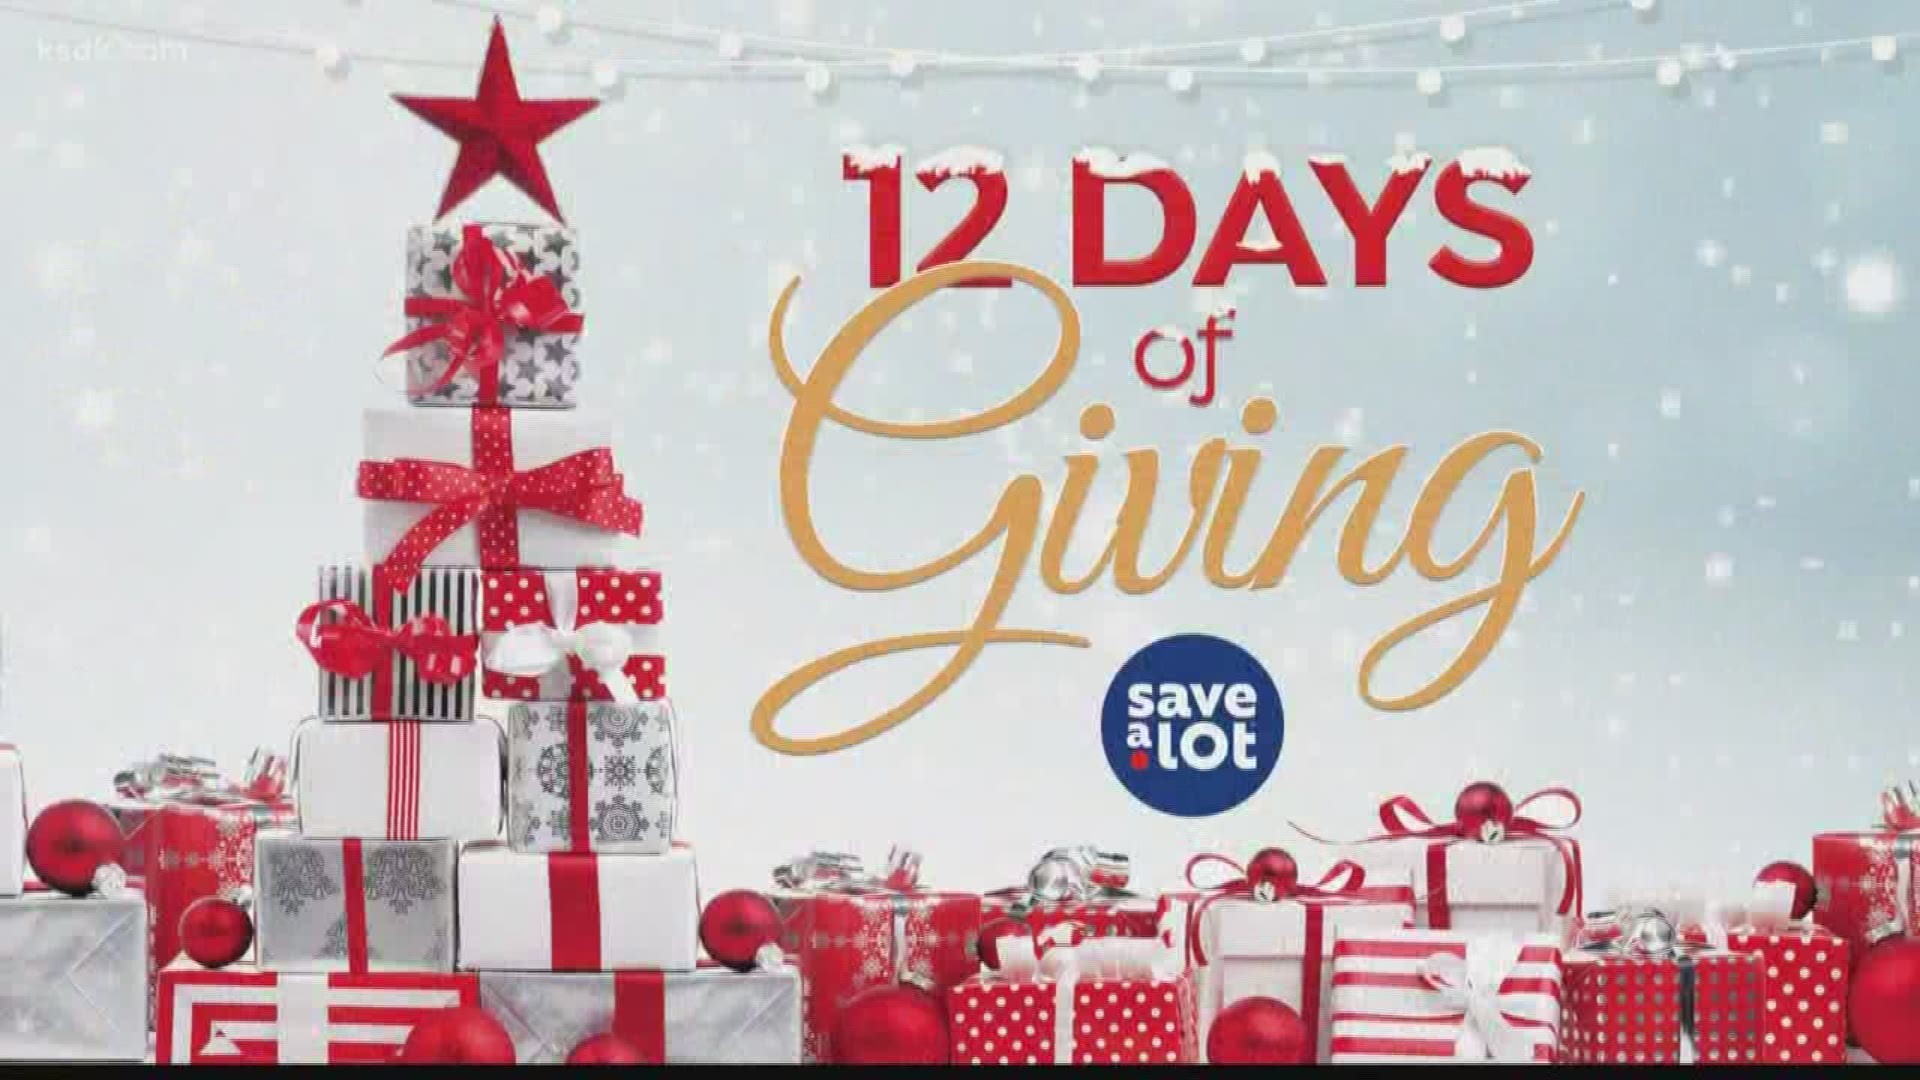 Save A Lot has 12 Days of Christmas Giveaways!